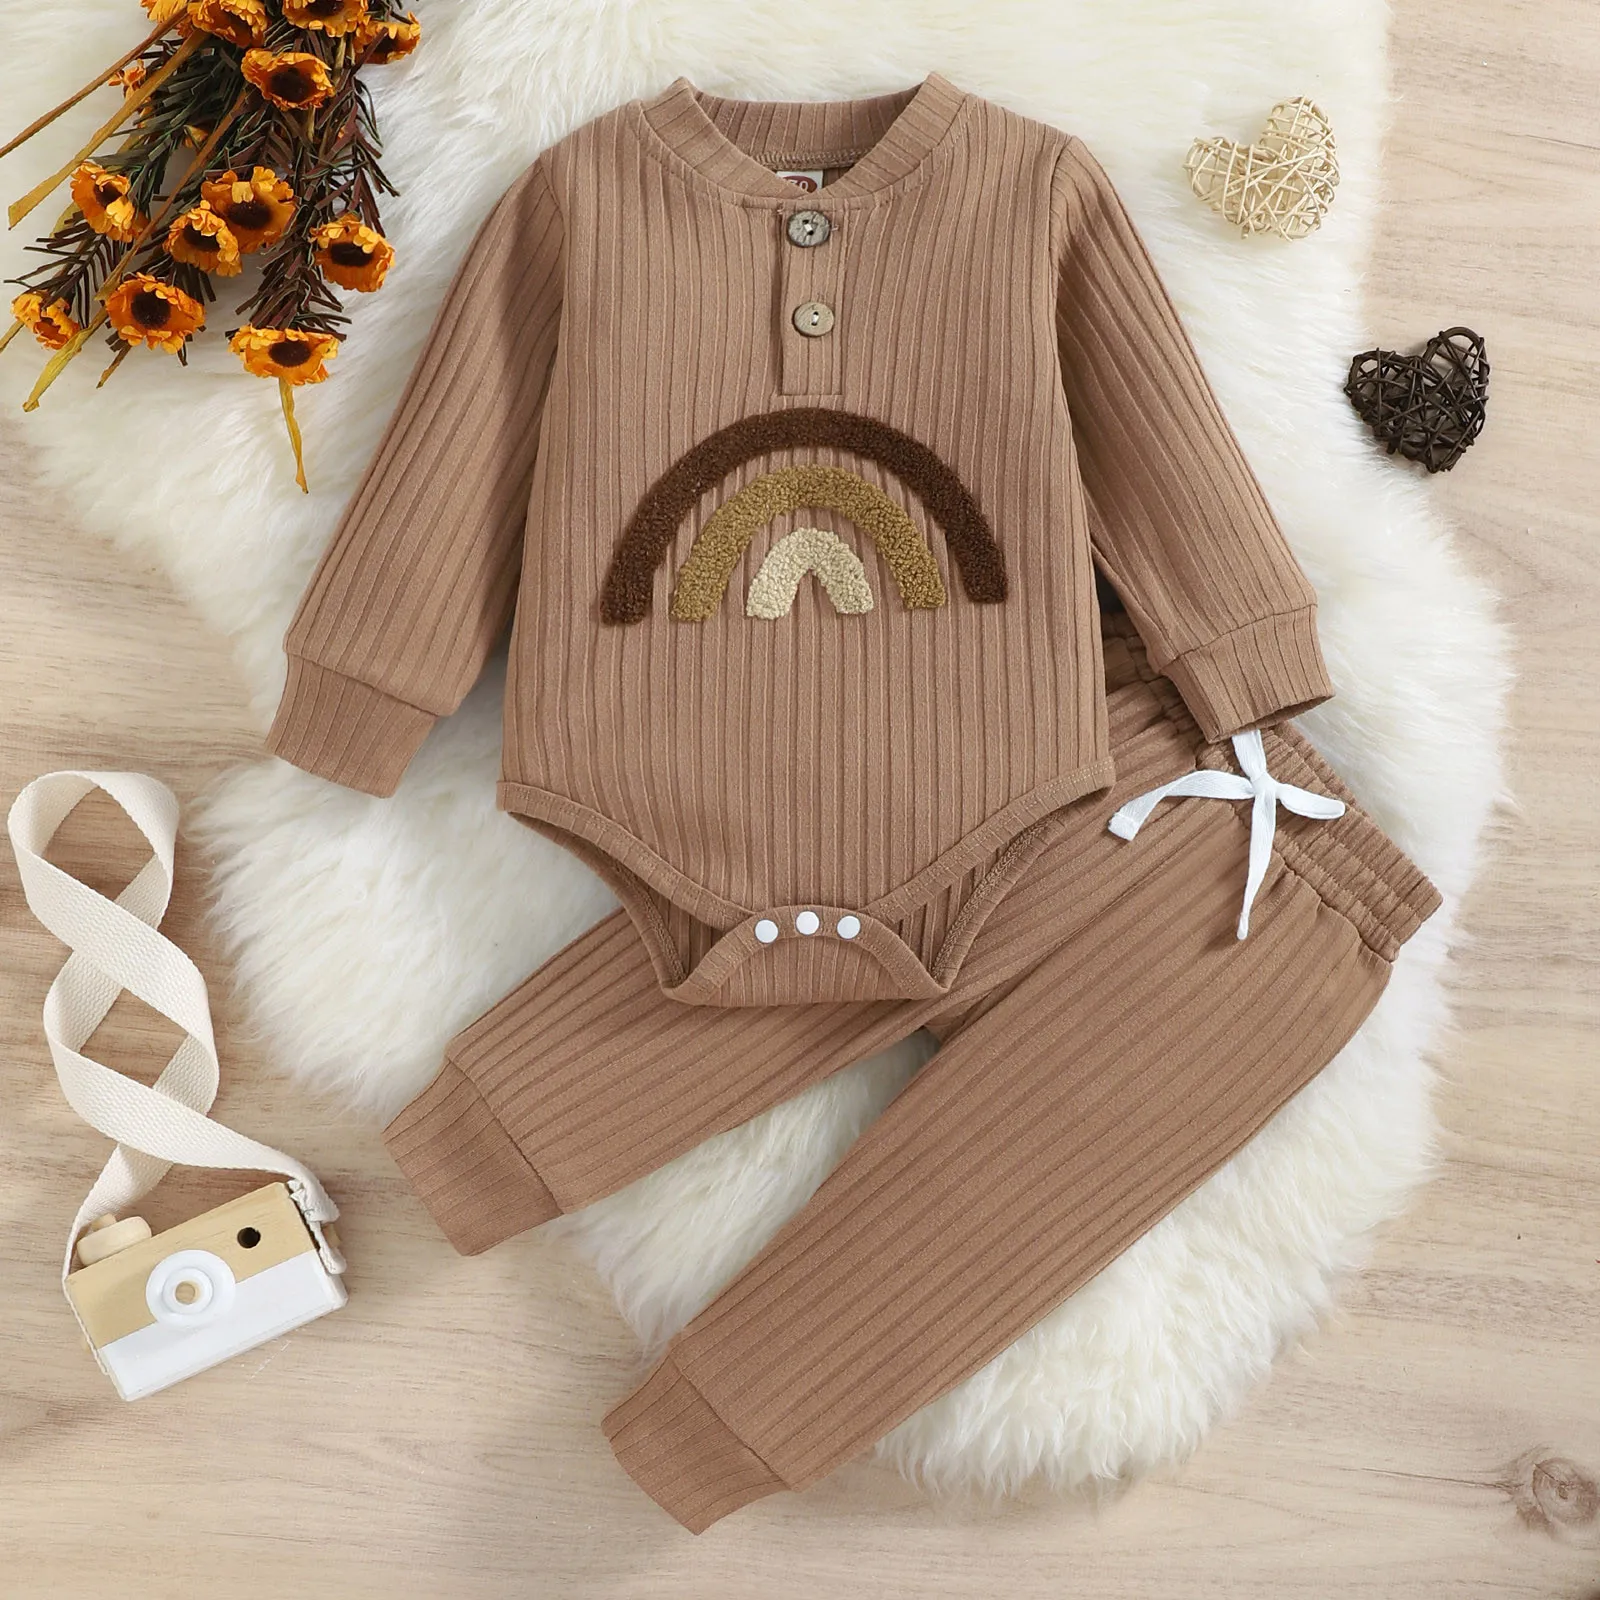 

Girl Clothes 4t Baby Blanket Outfit Kids Outfit Infa Autumn Clothe Romper Set Baby Girl Girl Pant Romper Girl Long Sleeve Romper